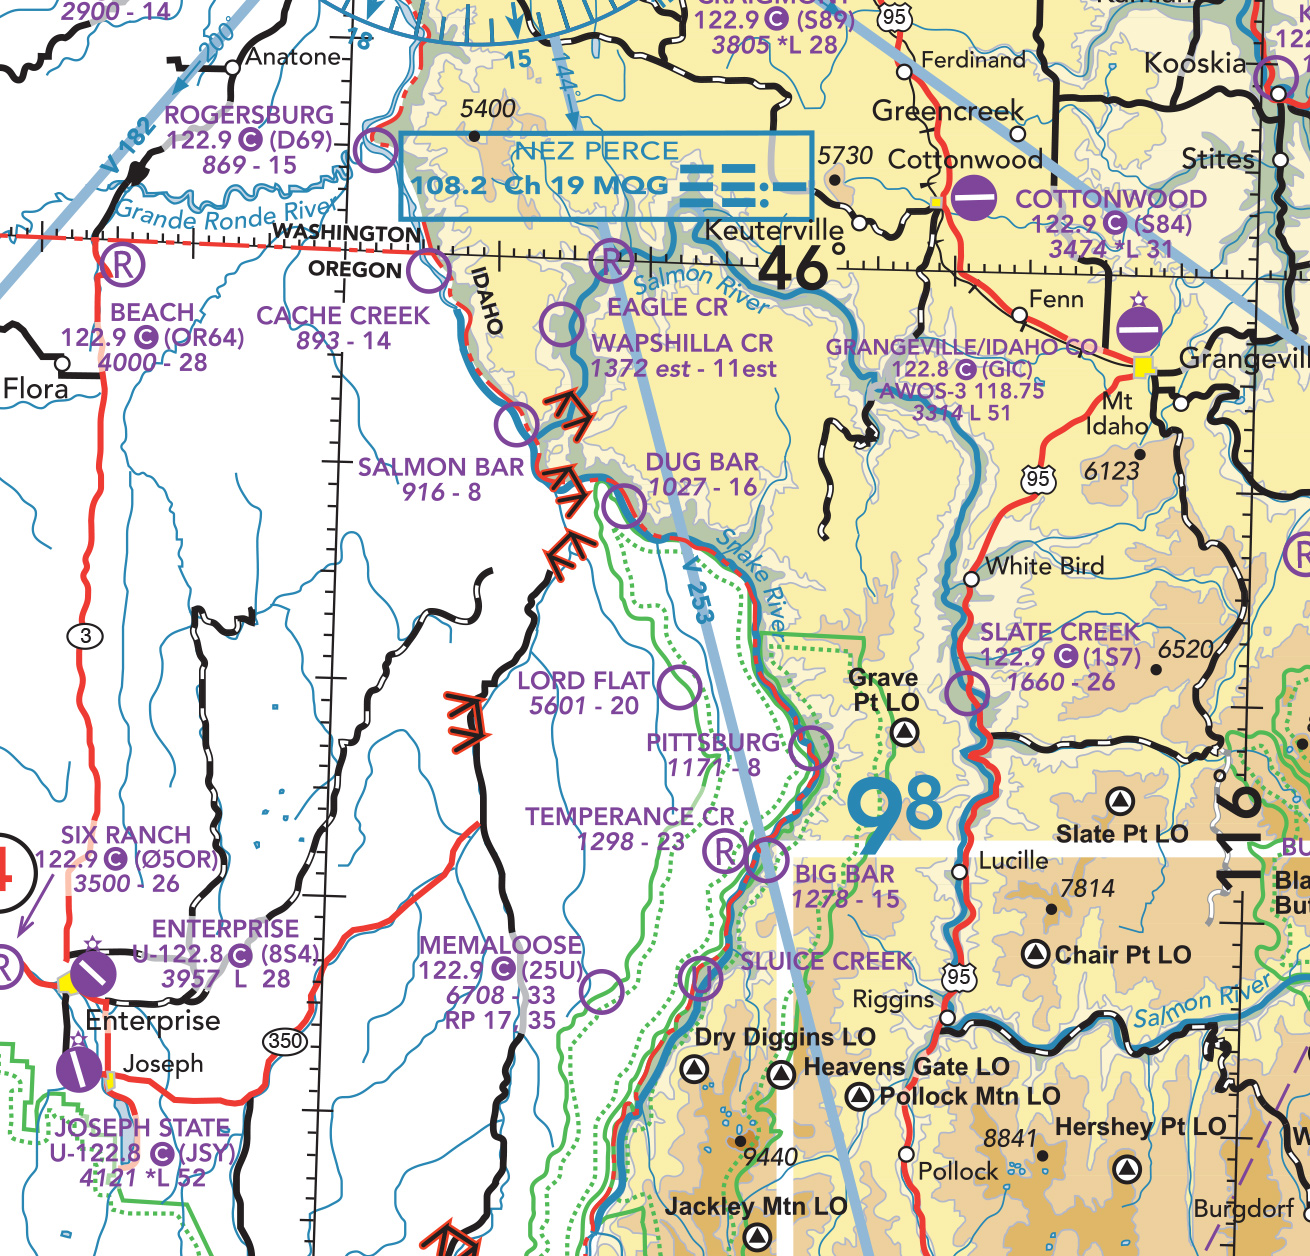 A section of the Idaho Aeronautical Chart shows all the airstrips mentioned in this article, all of which lie near the Oregon/Idaho border except Rogersburg, on the Washington/Idaho border. Note the location of the cable crossing between Dug Bar and Salmon Bar. Courtesy Galen Hanselman, Q.E.I. Publishing.